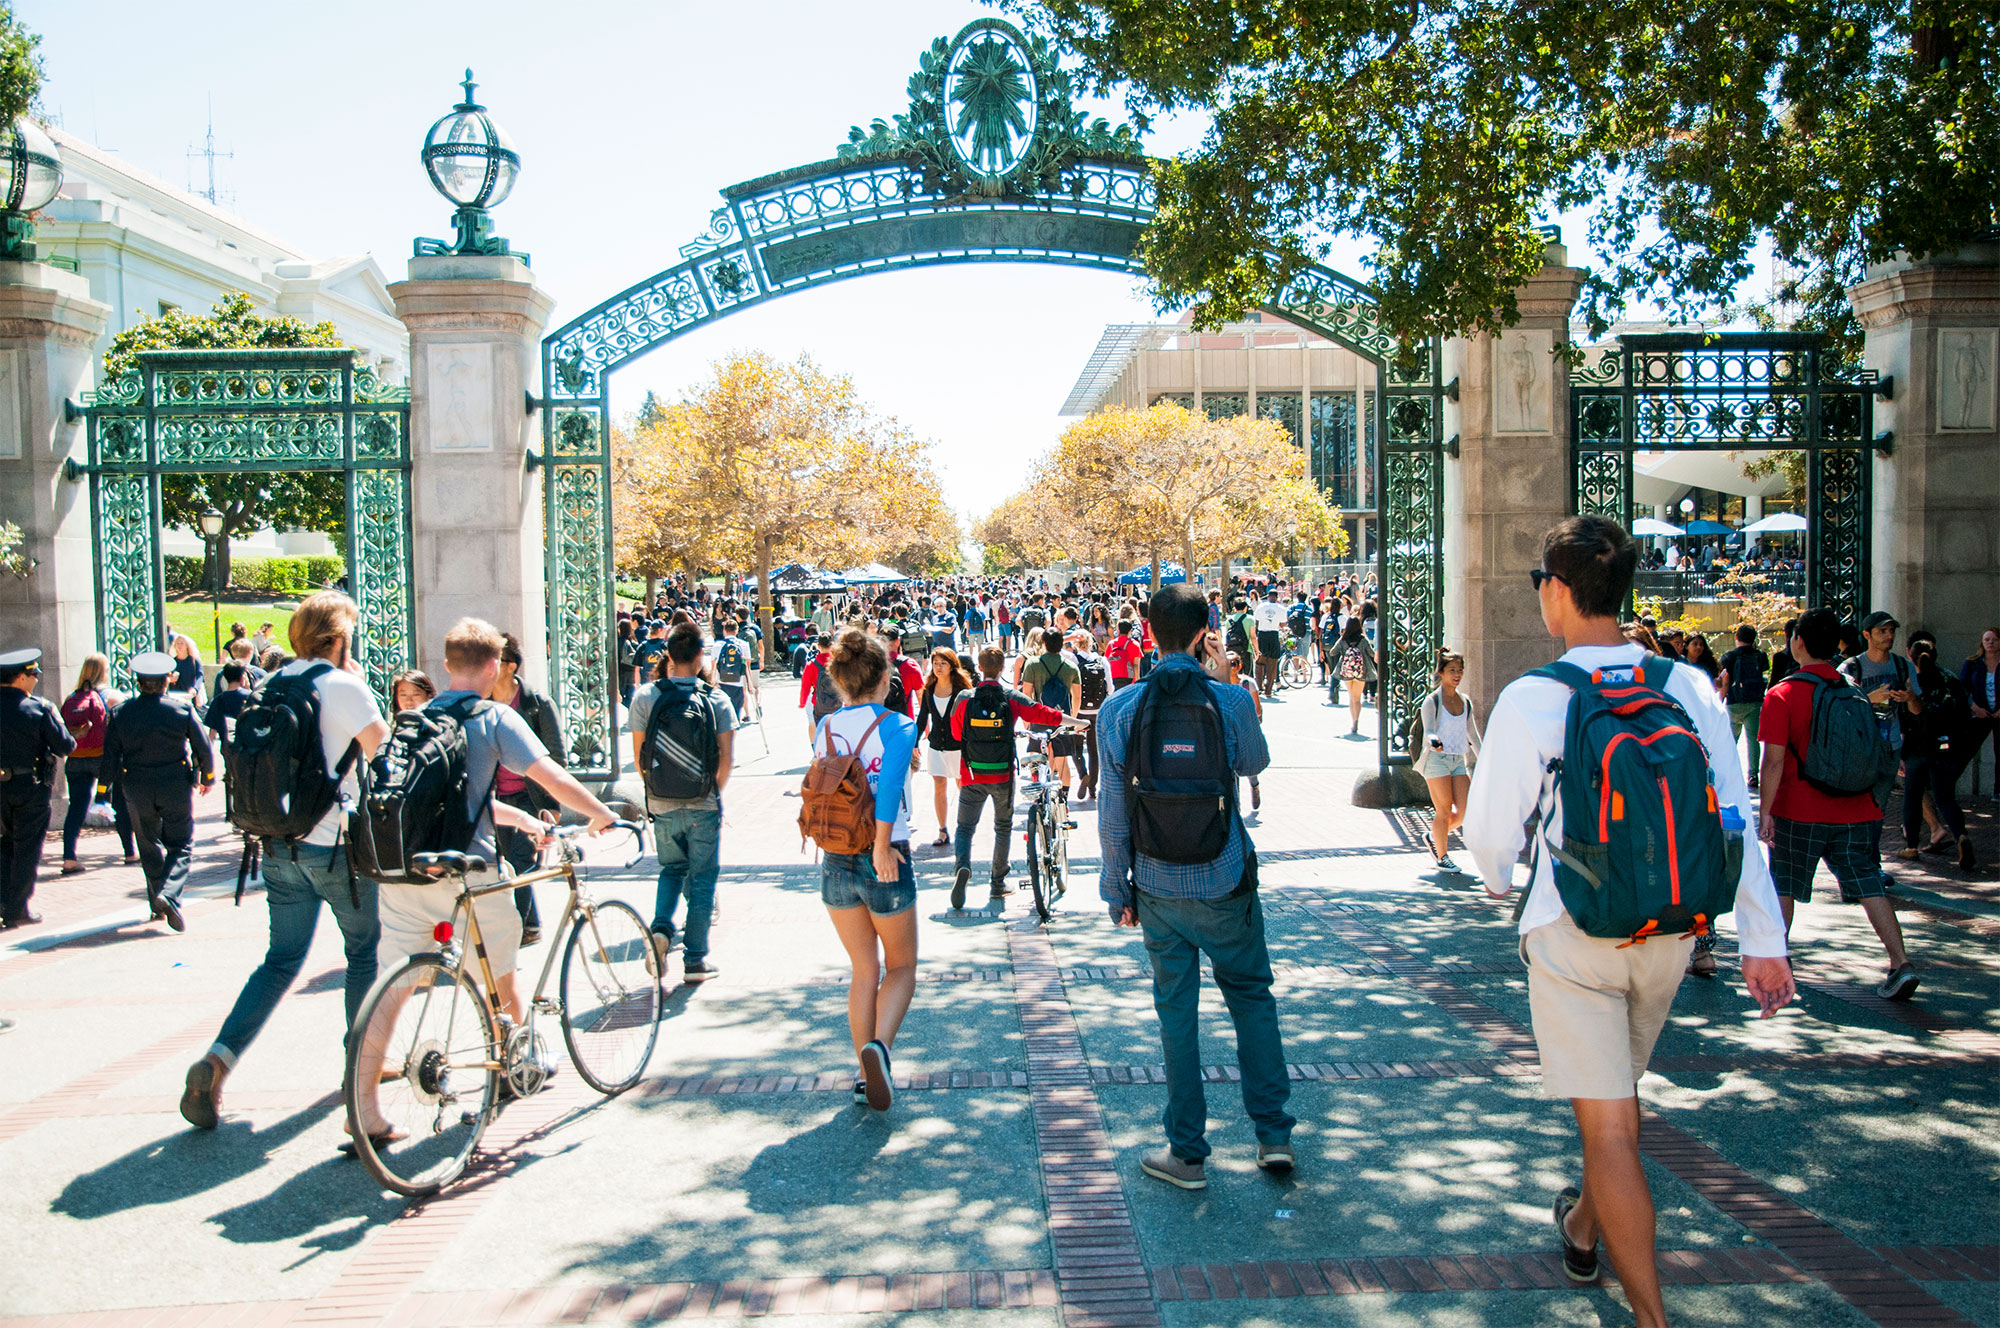 Students walking under Sather gate on the Berkeley campus